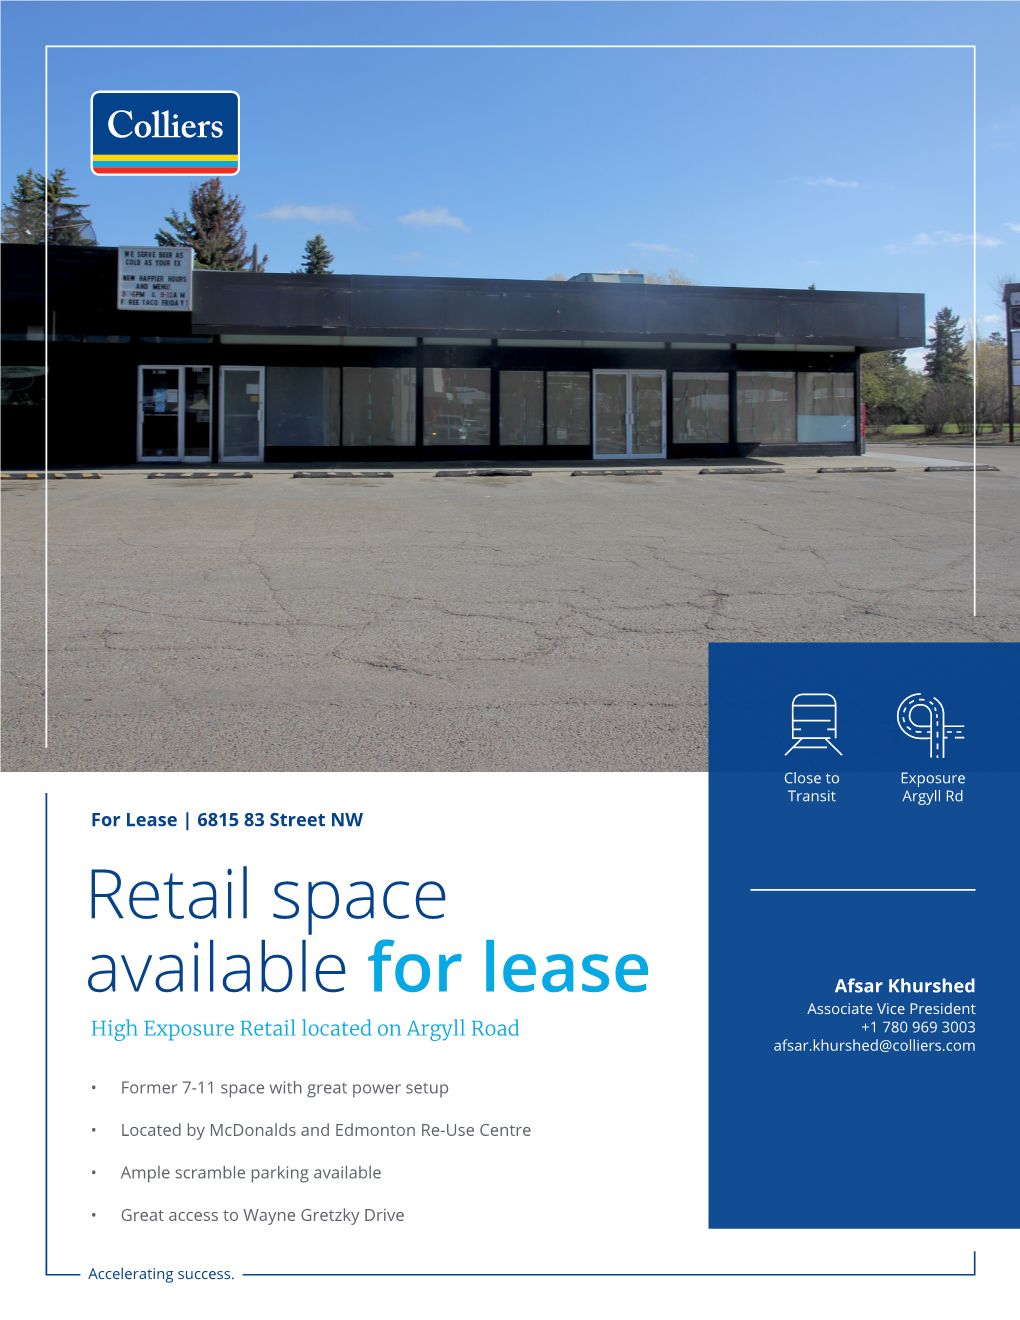 Retail Space Available for Lease Afsar Khurshed Associate Vice President High Exposure Retail Located on Argyll Road +1 780 969 3003 Afsar.Khurshed@Colliers.Com